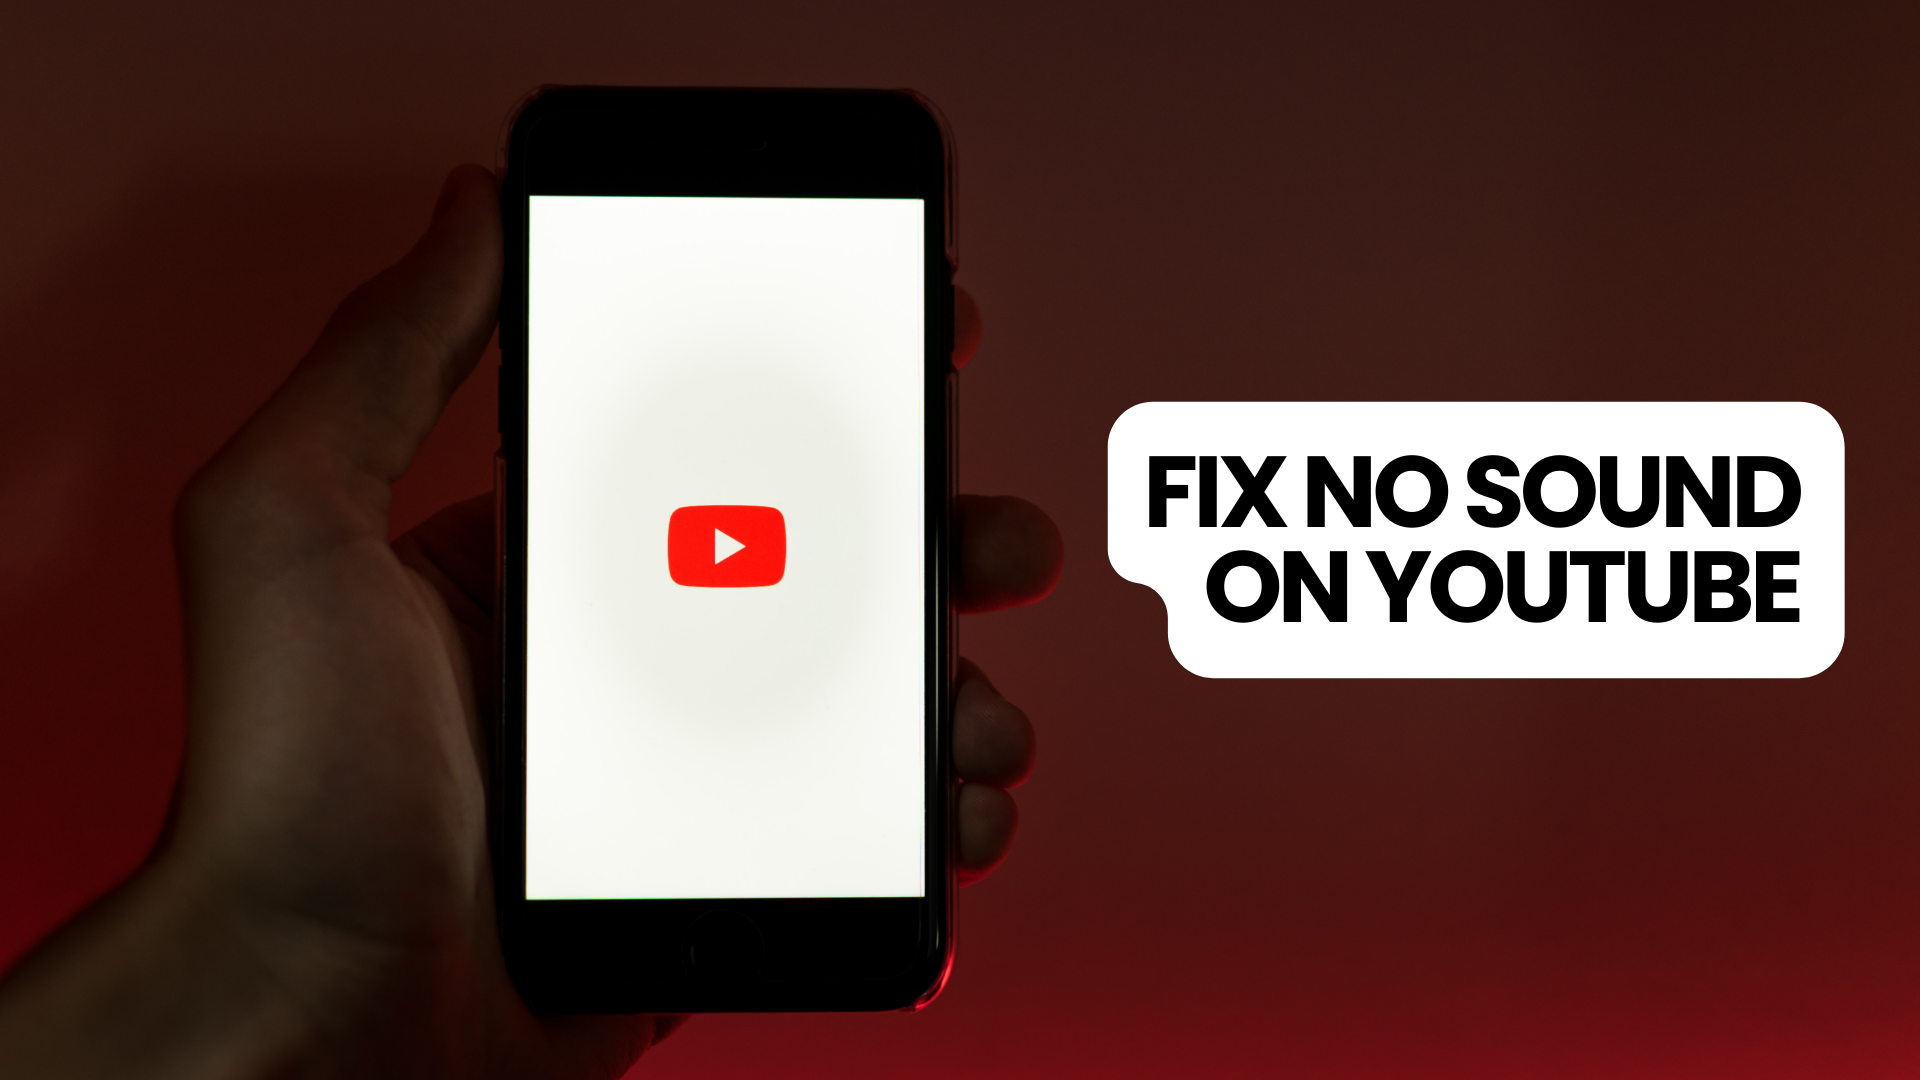 How to fix No Sound on YouTube